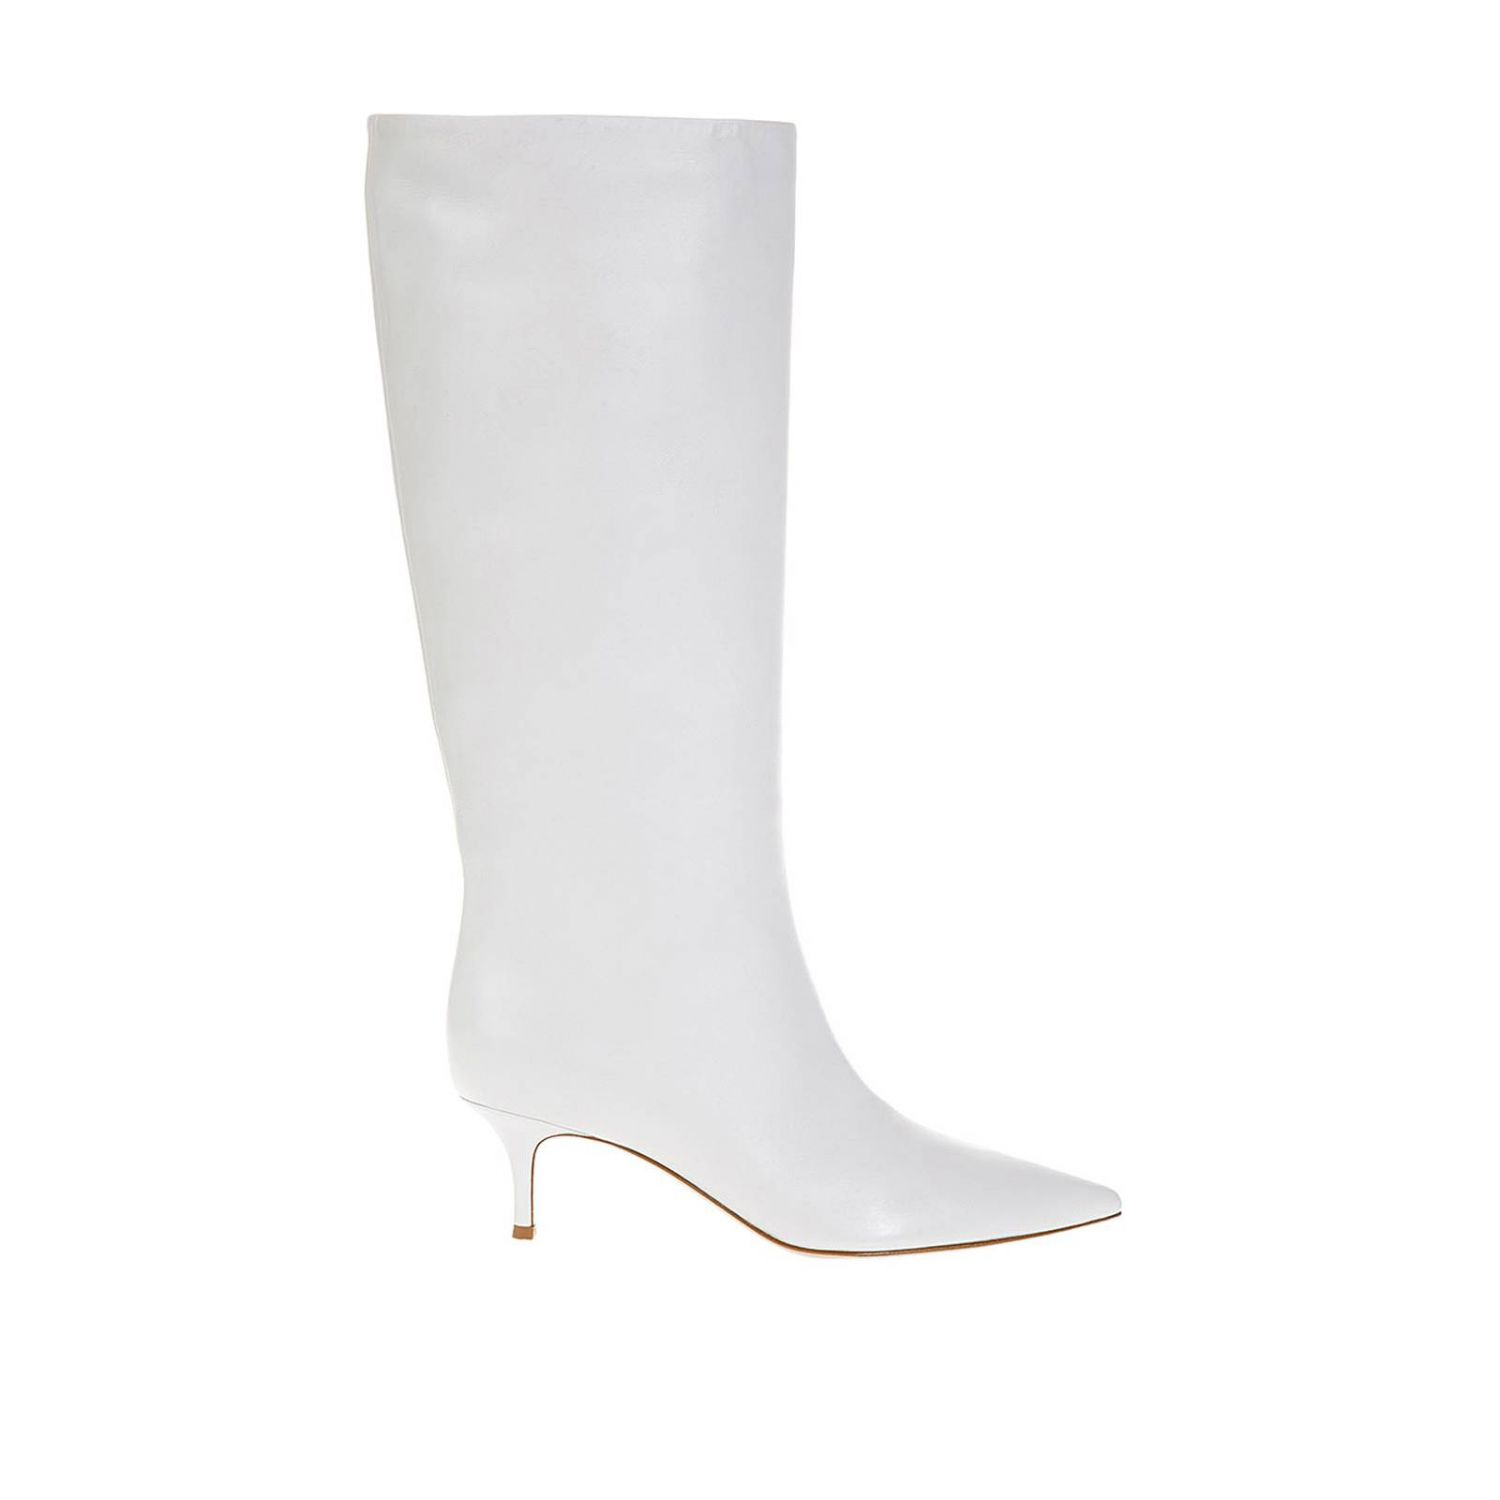 Gianvito Rossi Outlet: Boots women - White | Boots Gianvito Rossi ...